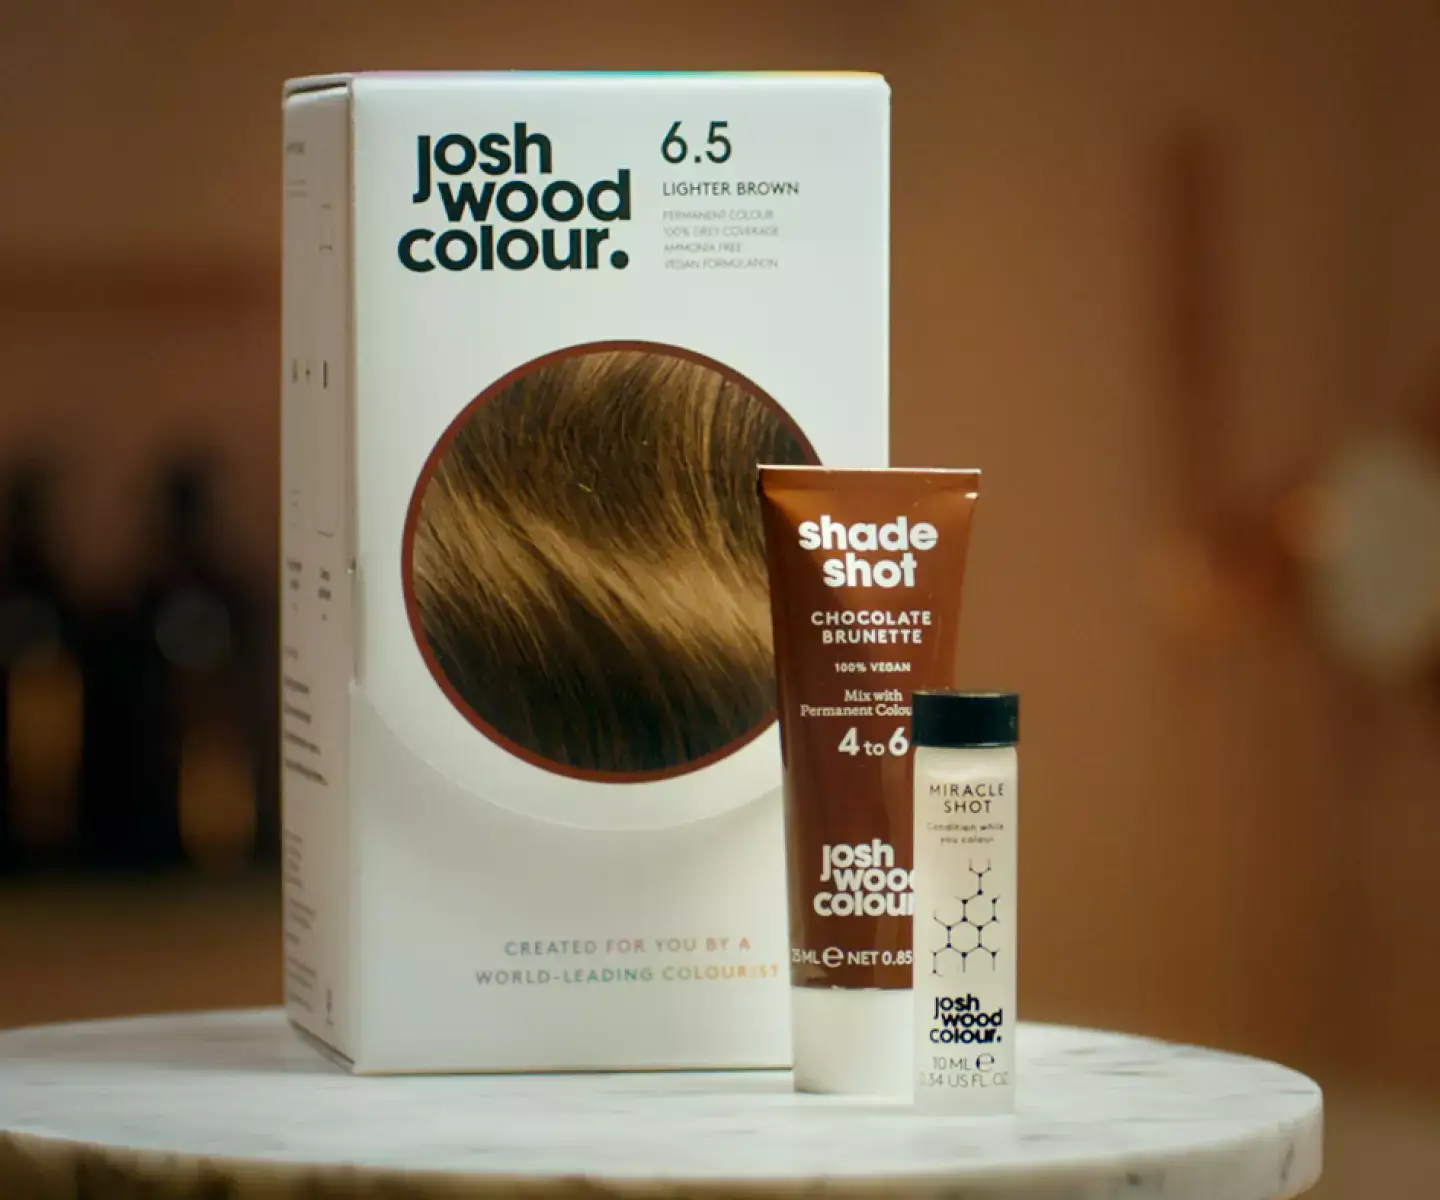 Josh Wood Colour: At Home Hair Colour & Expert Root Touch Up